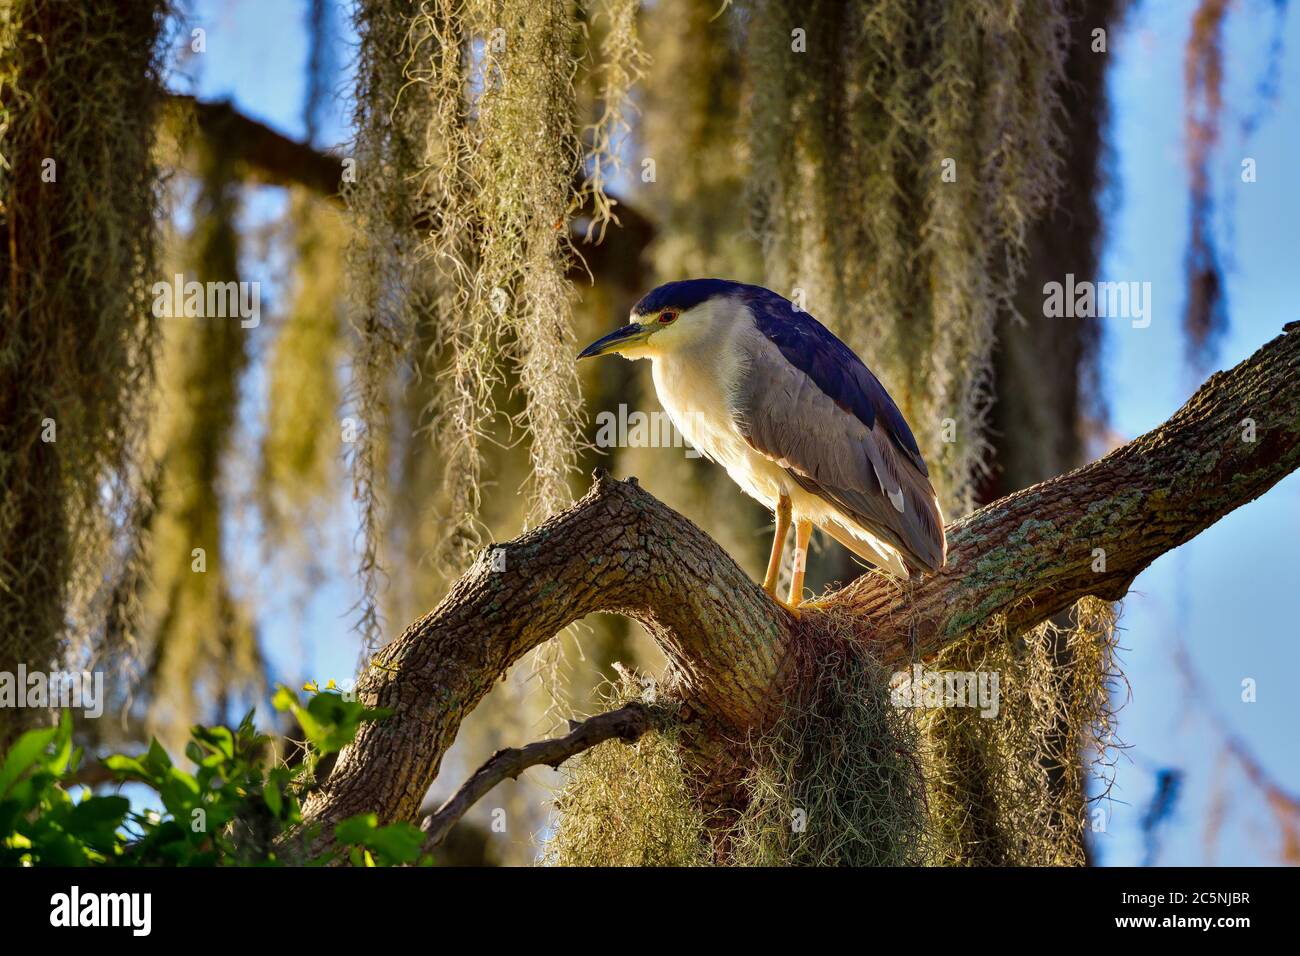 Black-crowned night heron is resting after night activities in the hammock tree. Stock Photo